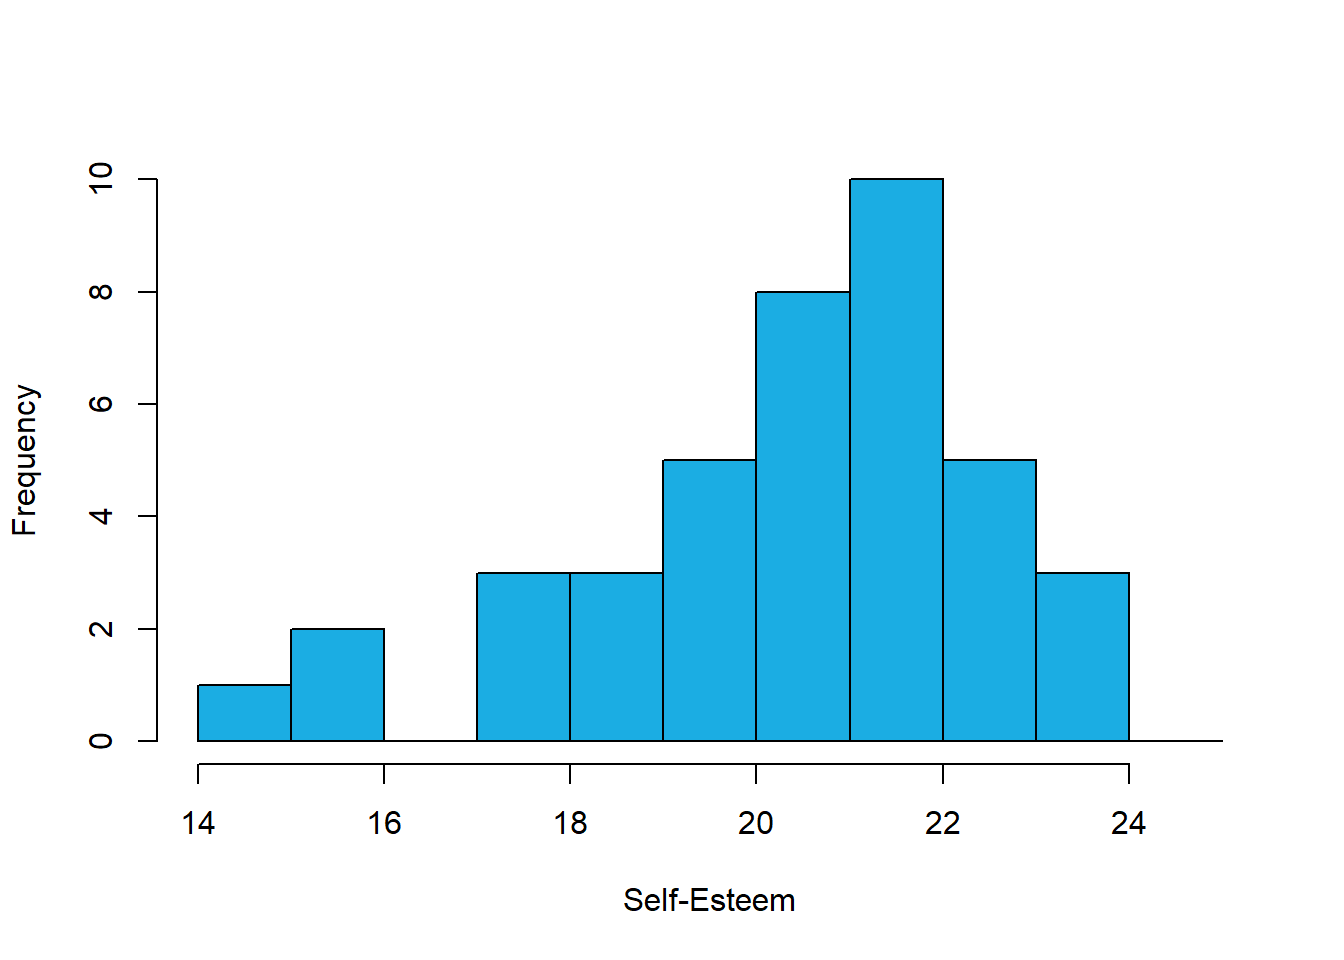 Histogram showing the distribution of self-esteem scores presented in the frequency table above.